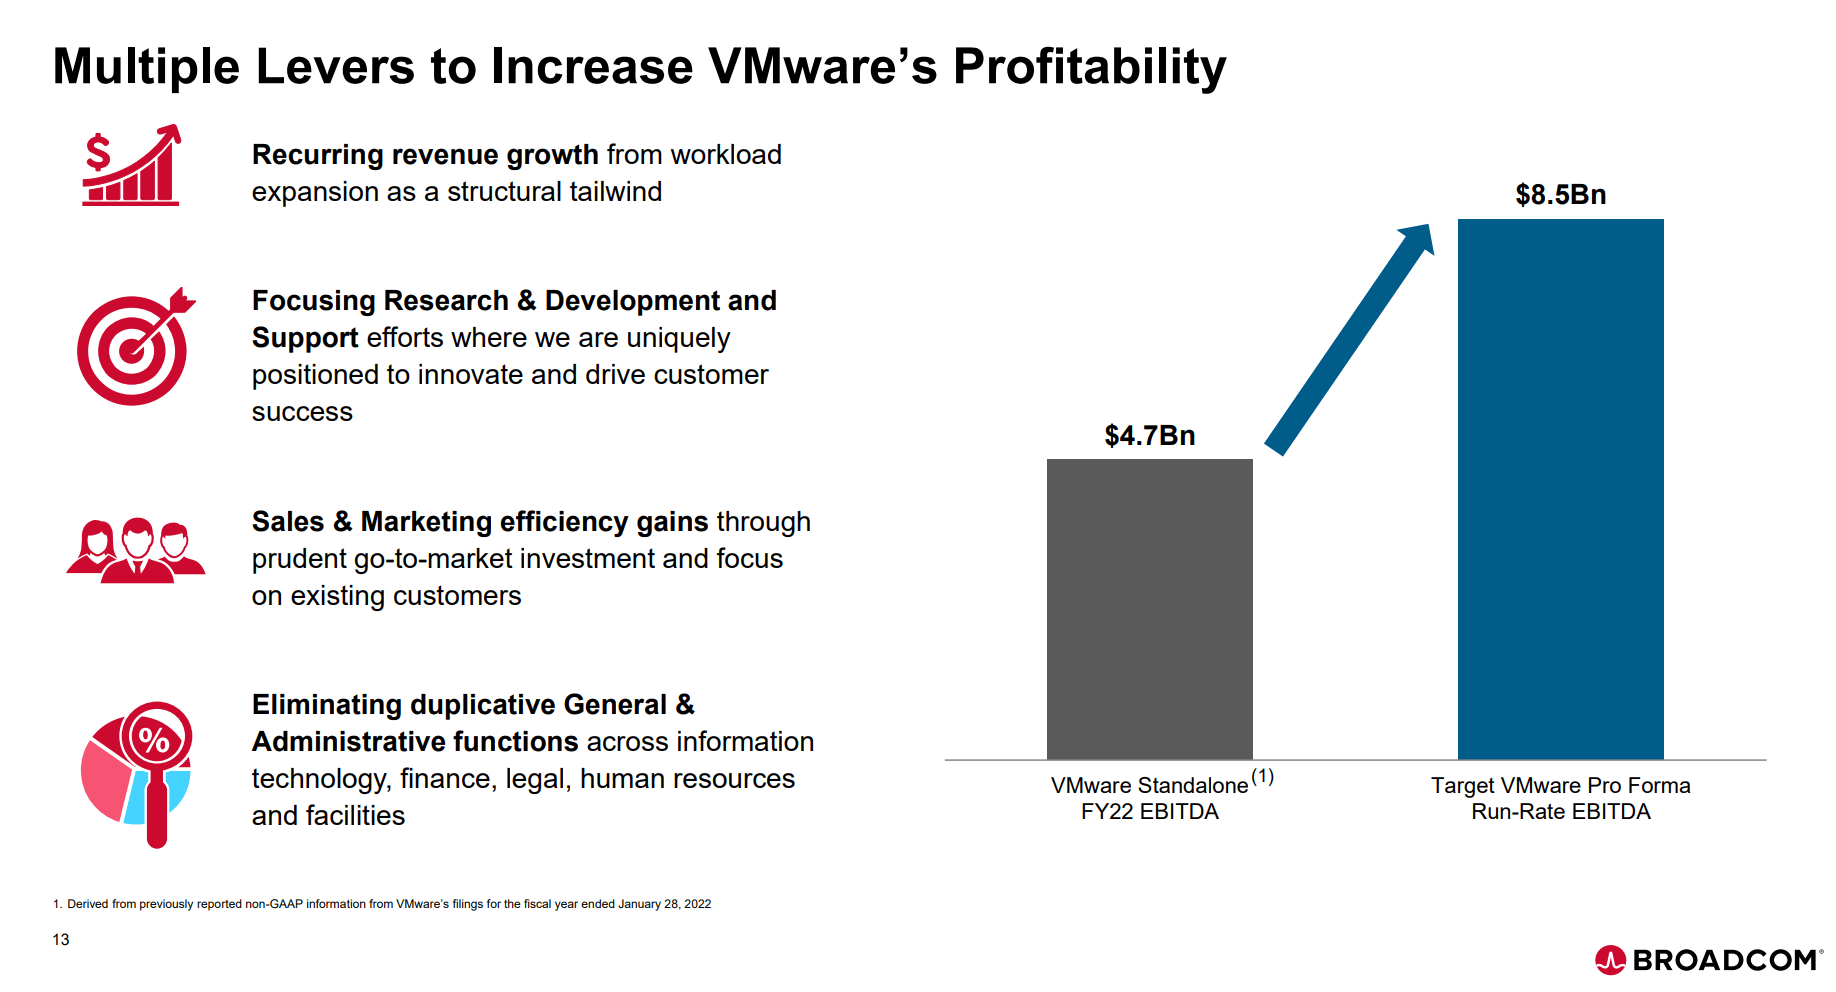 VMWare synergies